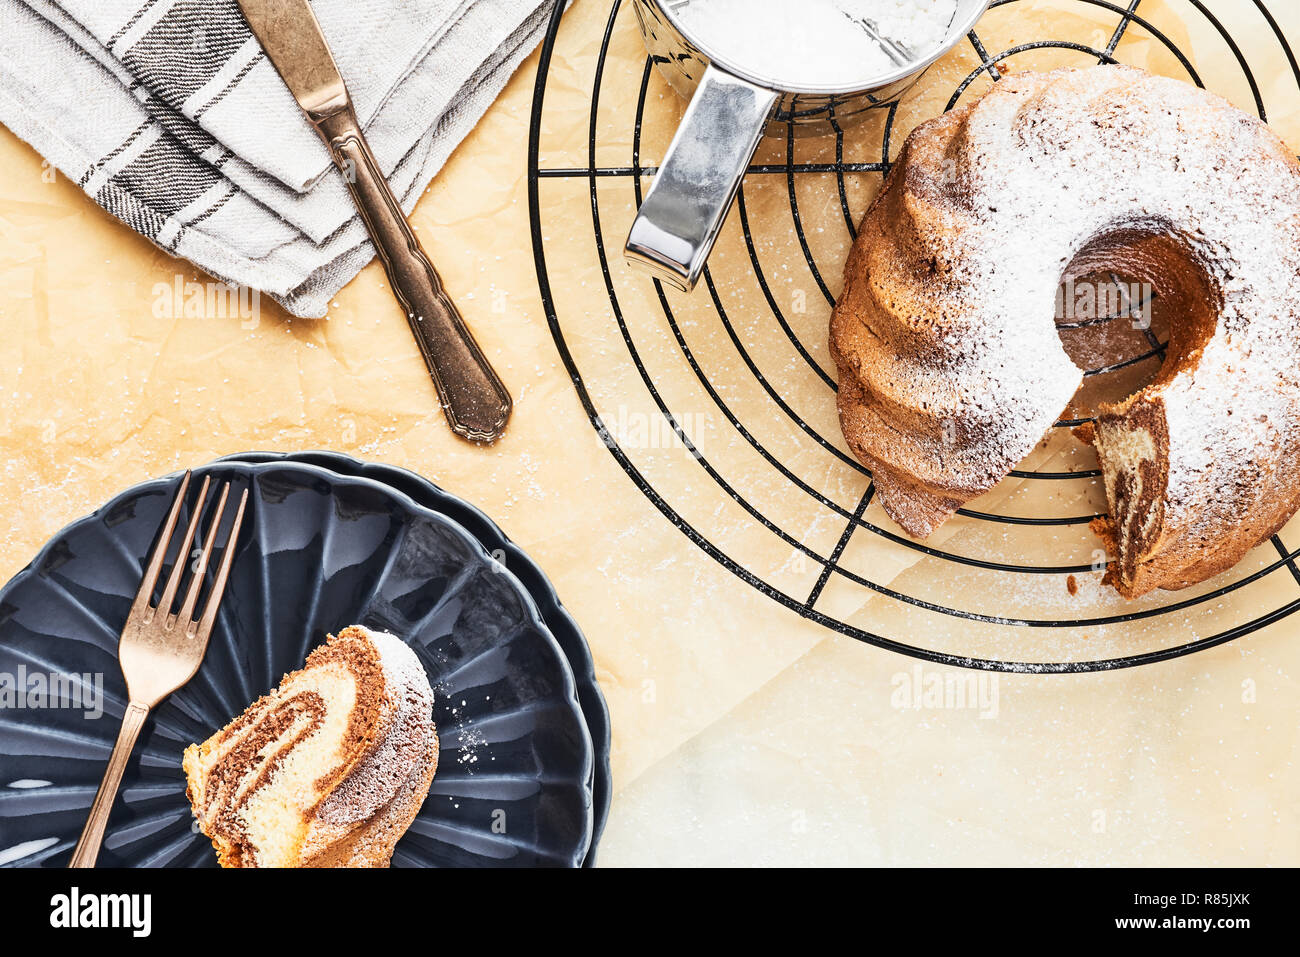 Marble bundt cake on french cooling rack with powdered sugar and one slice of cake on dark blue side plate over baking paper. Holiday baking backgroun Stock Photo